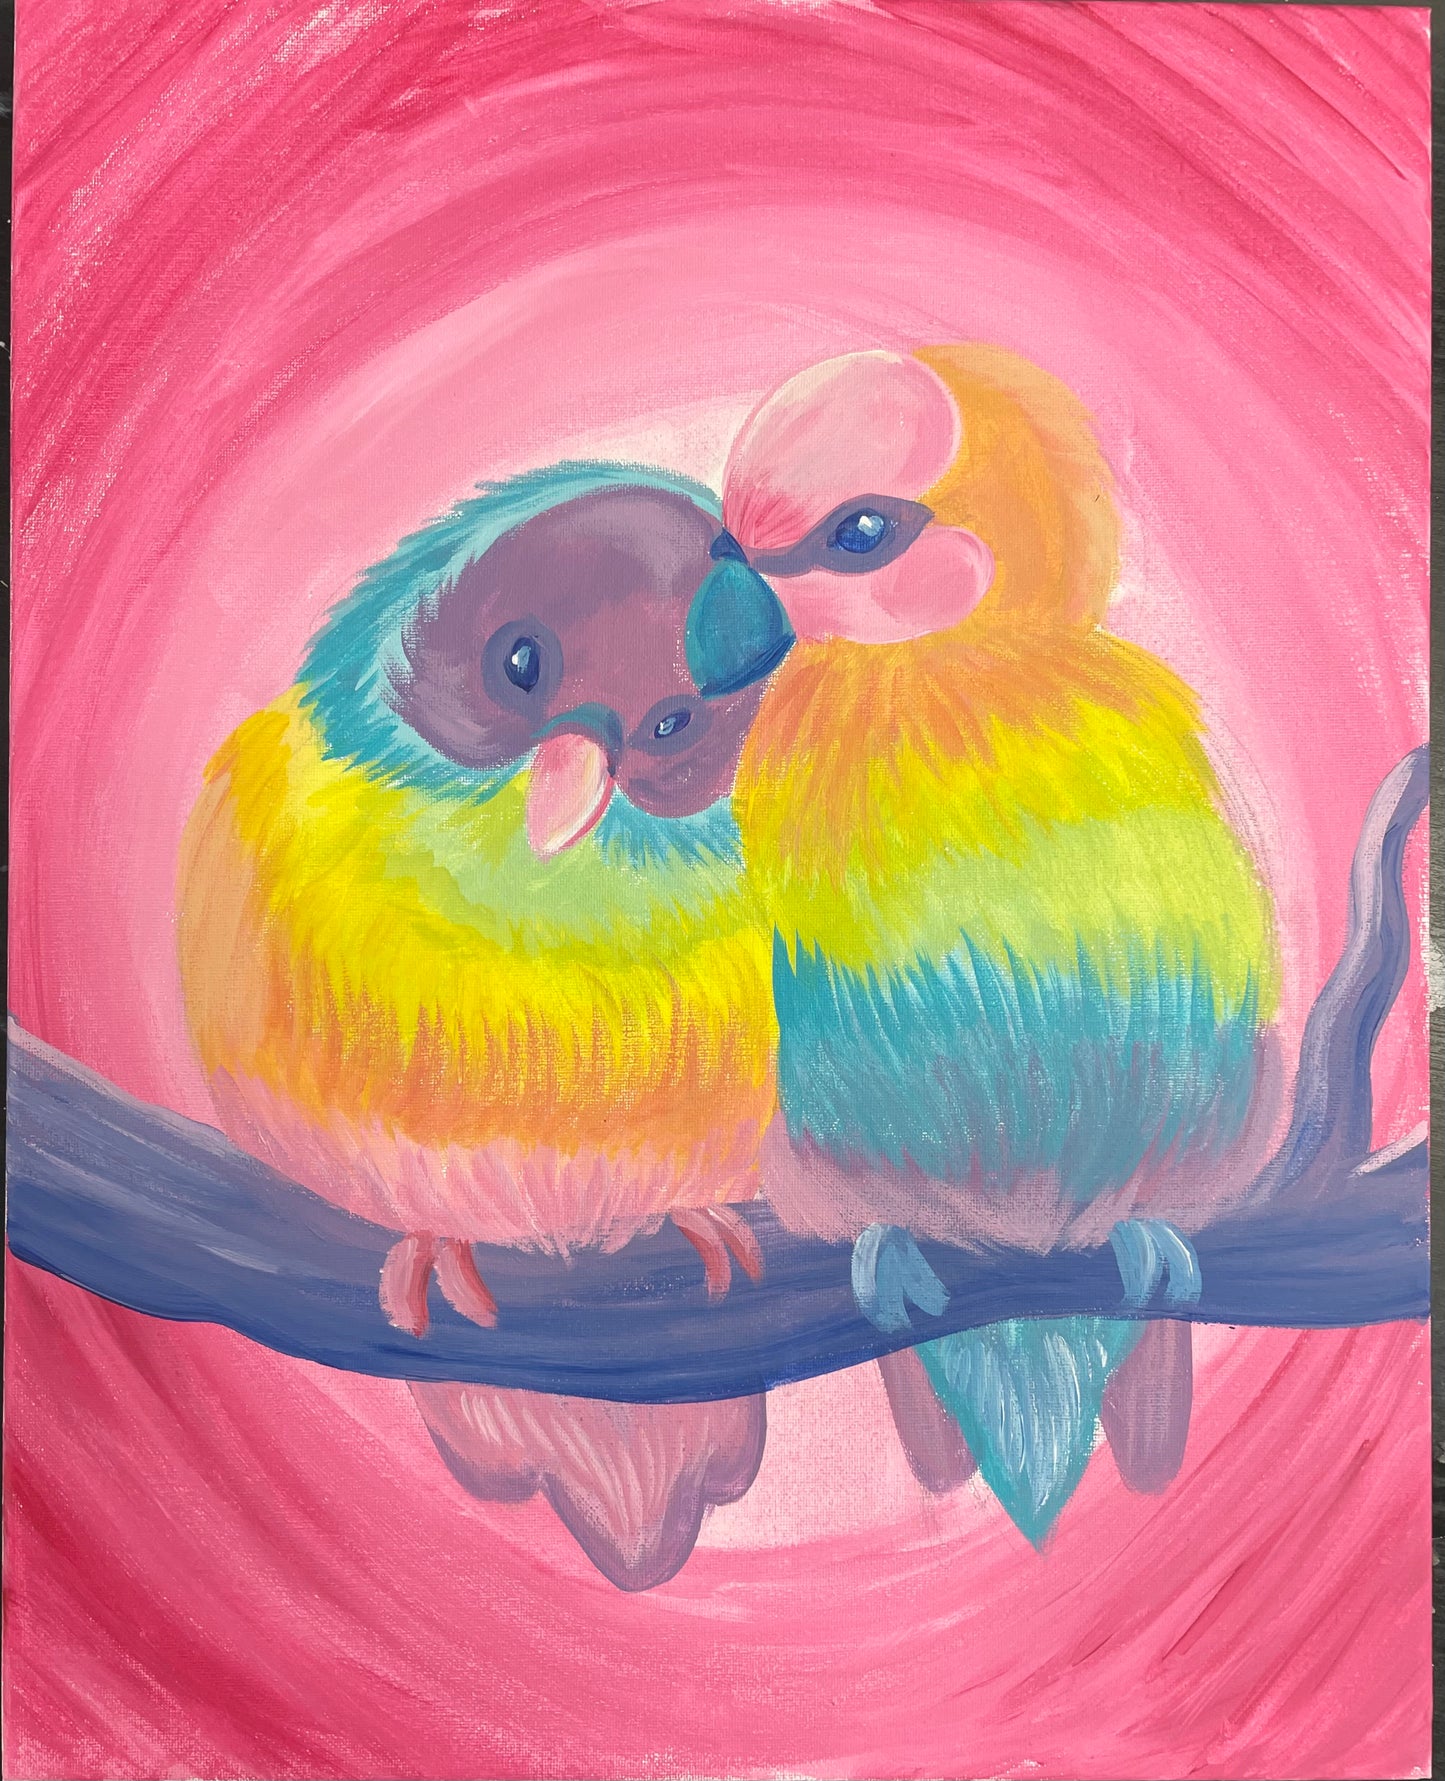 Thu, Feb 17, 7-9P “Lovebirds” Public Houston Wine and Painting Class